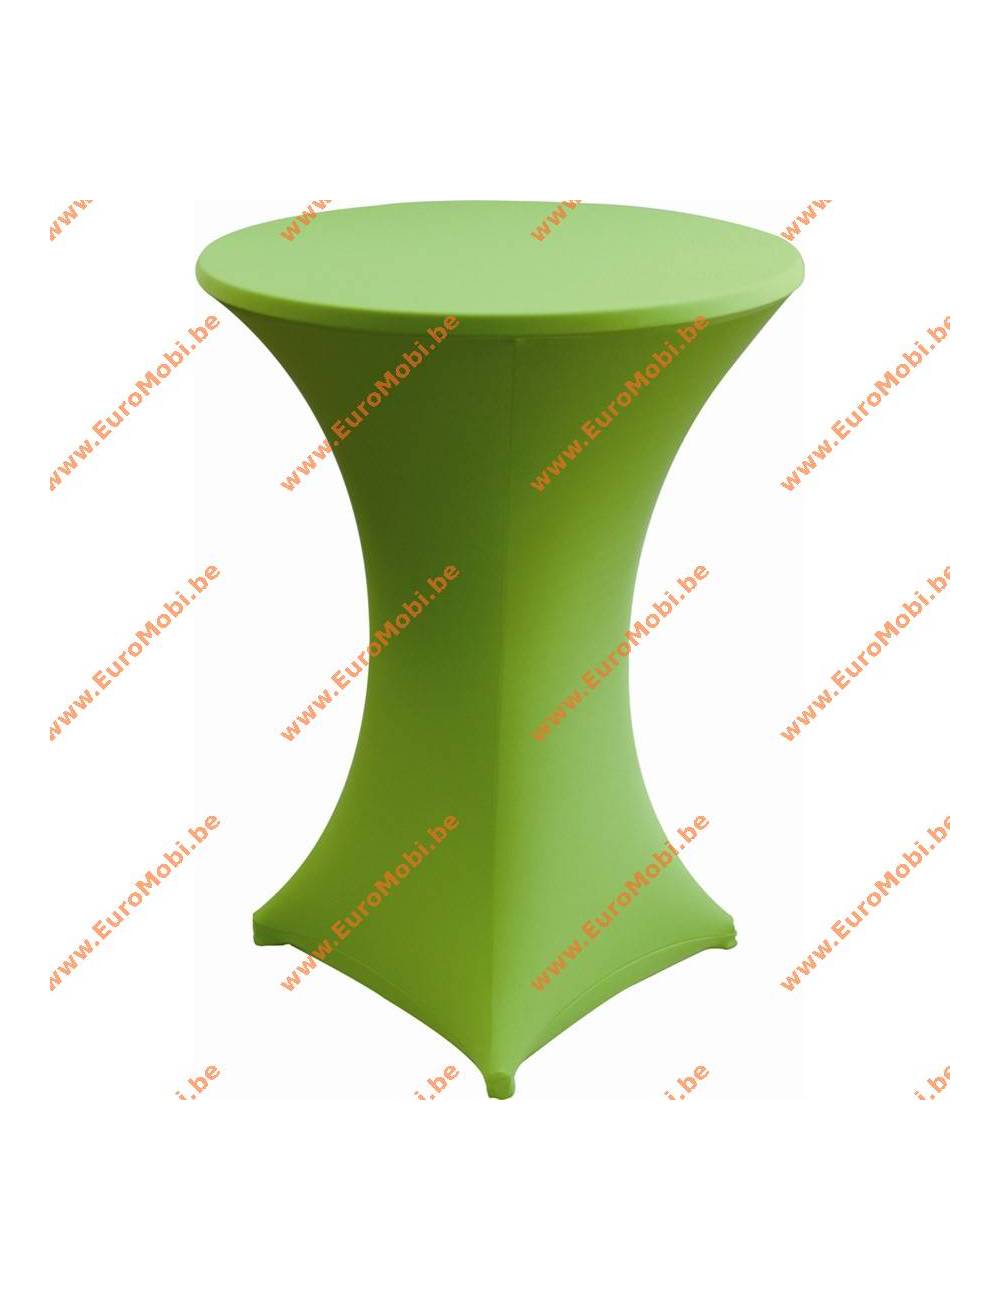 Cover and top stretch for standing table round green ligth